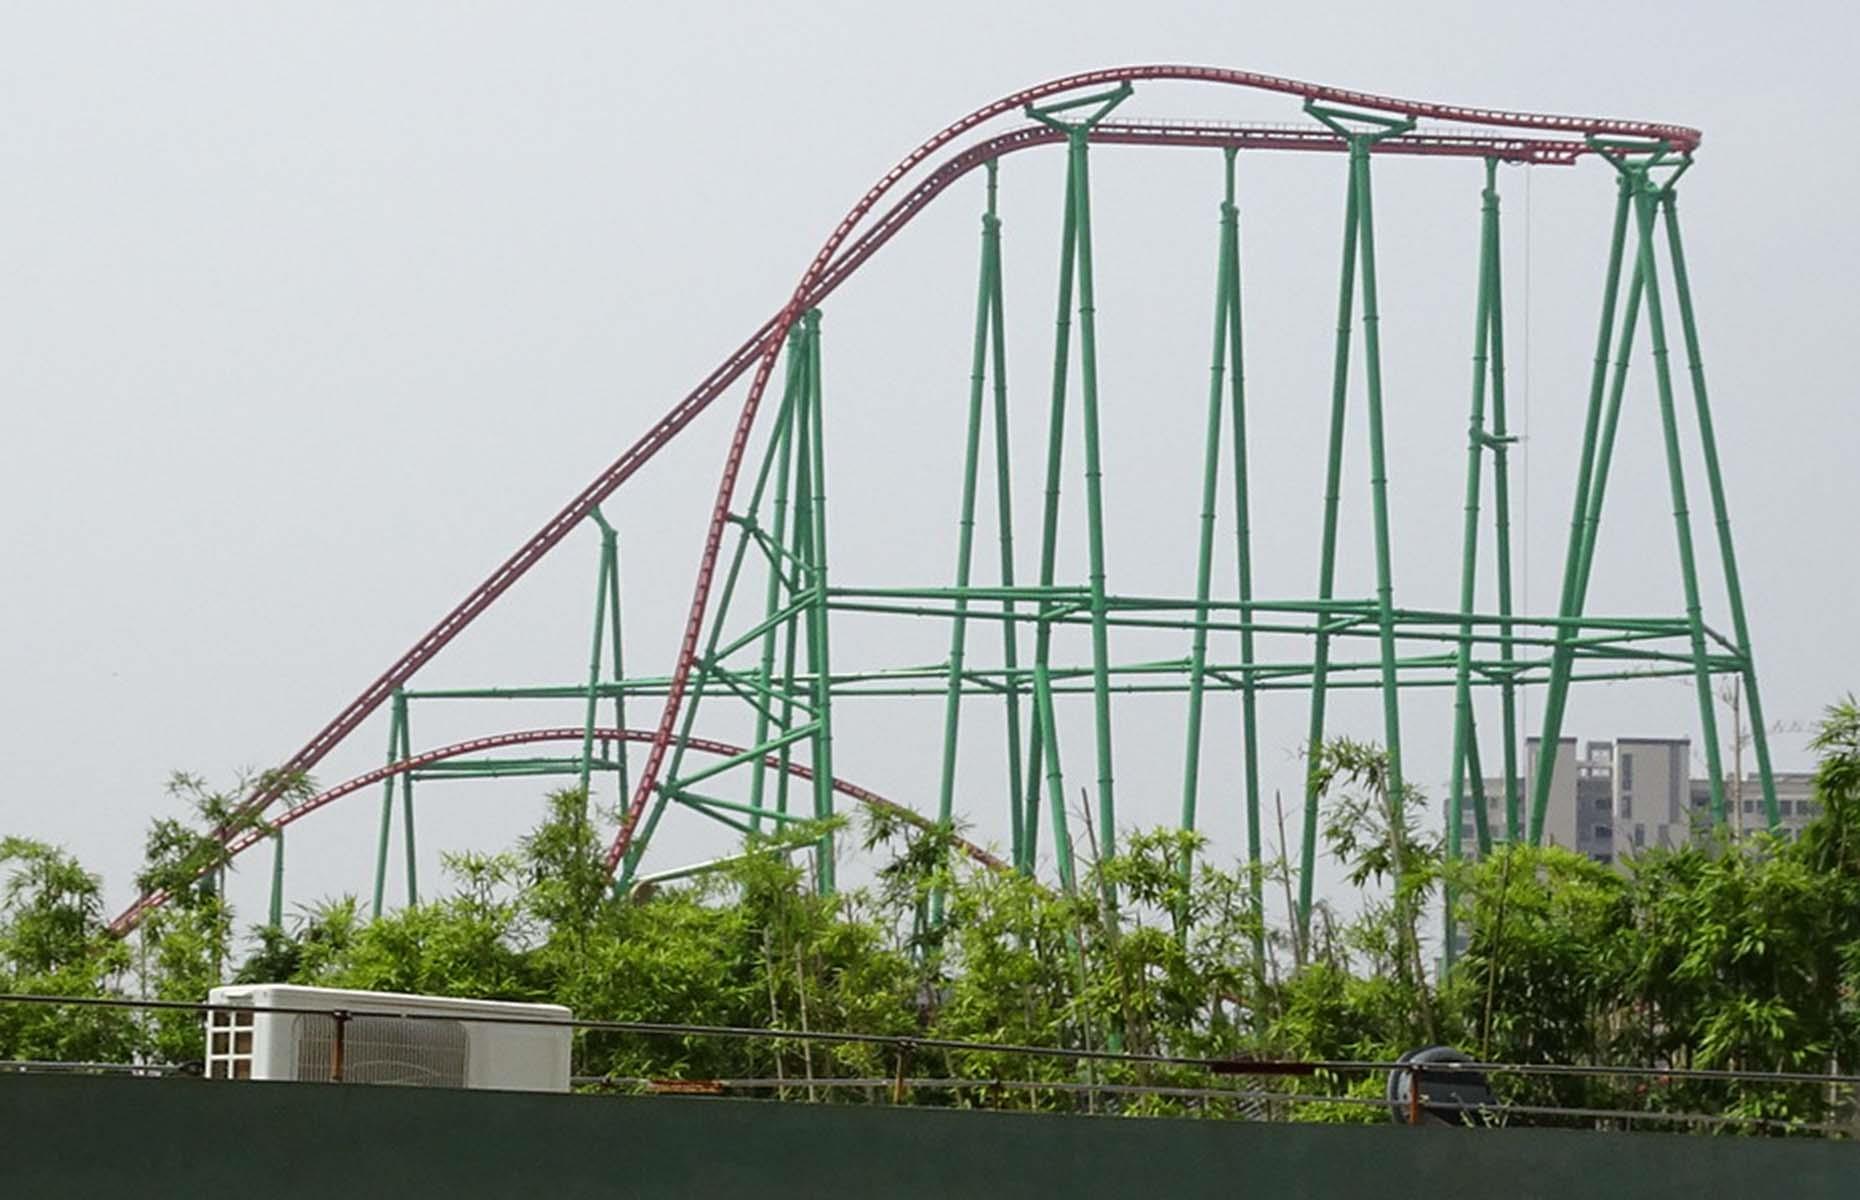 <p>Coaster Through the Clouds is currently China’s tallest and fastest roller coaster. At four minutes and 12 seconds, it also has the longest ride time. It takes riders, quite literally, through the clouds at 84.5 miles per hour.</p>  <p>The tallest part of the steel-track ride is 243 feet high with a maximum vertical angle of 78°.</p>